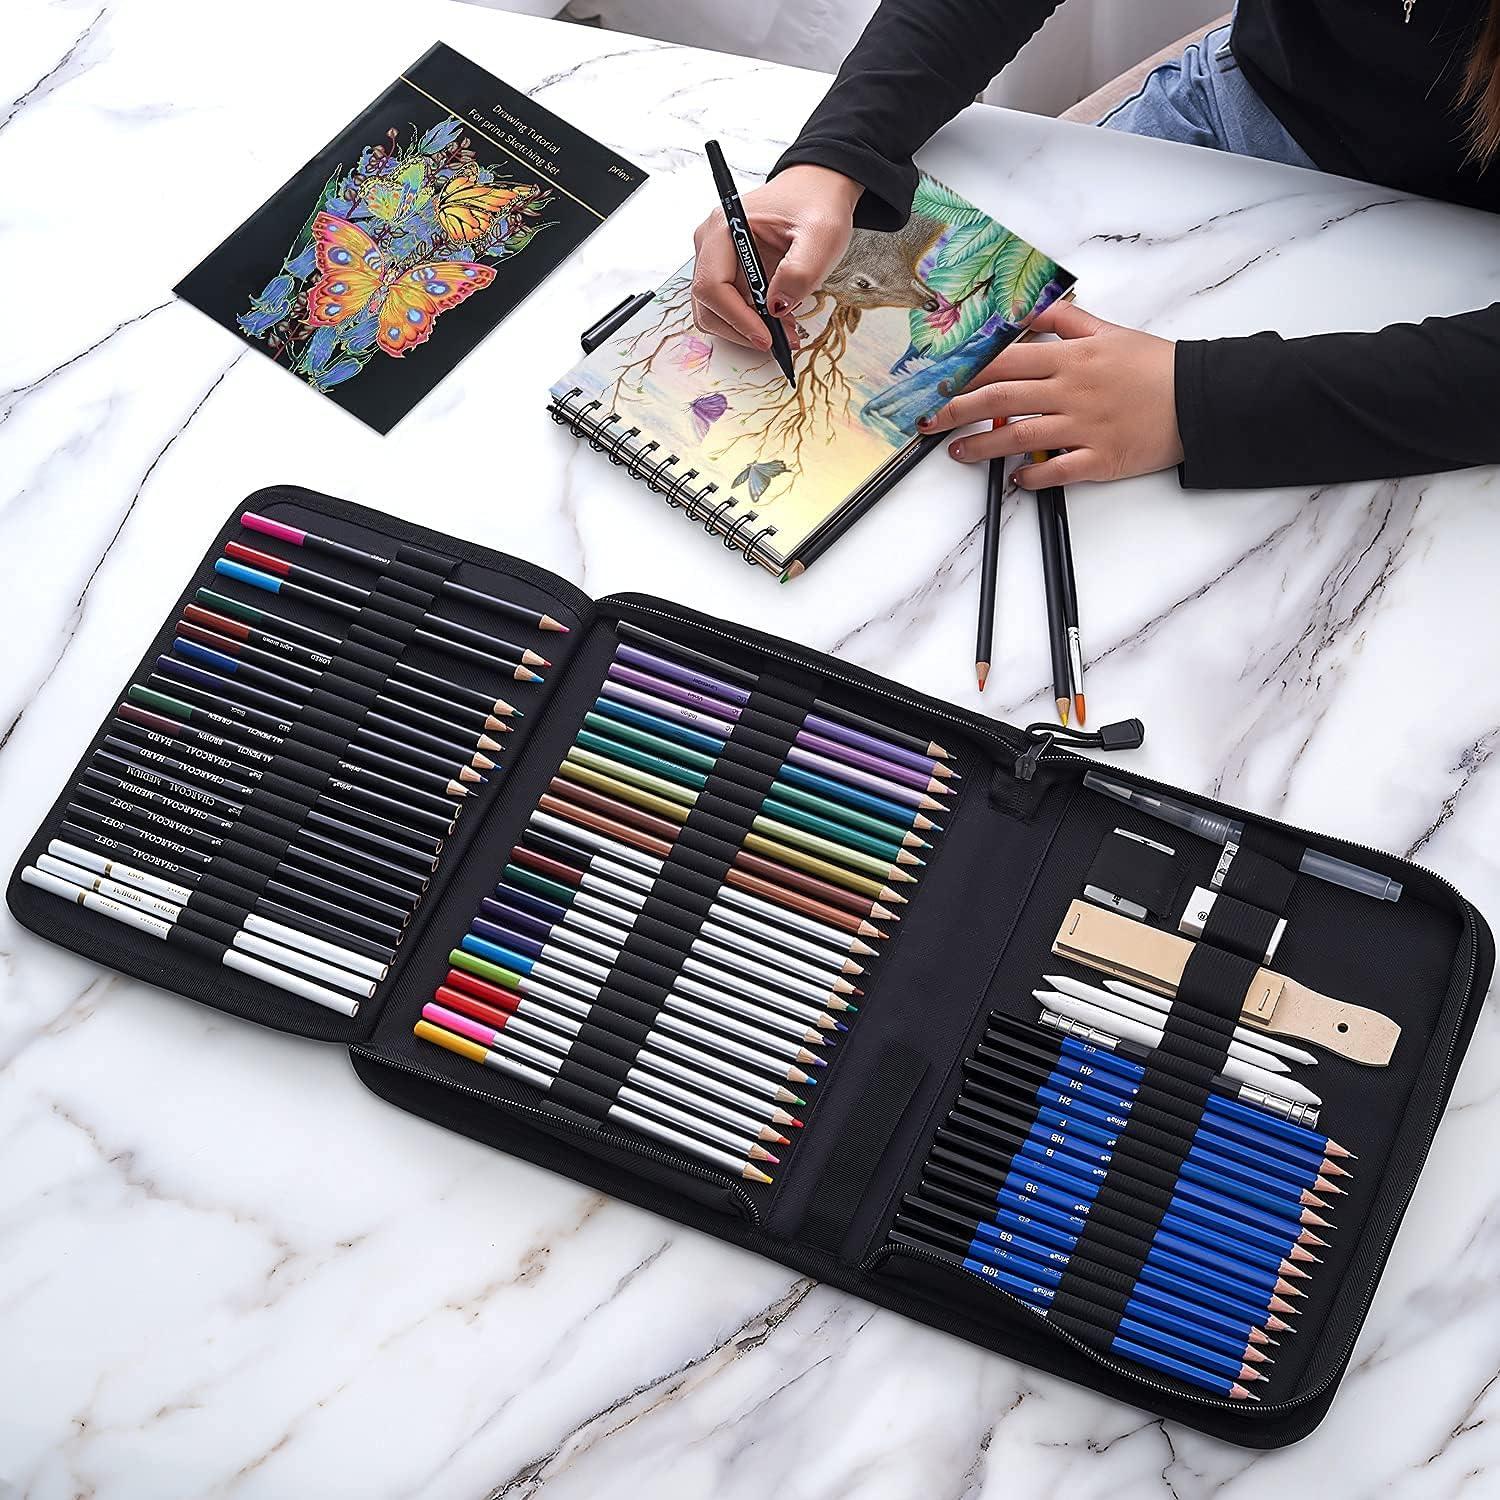 Prina 76 Pack Drawing Set Sketching Kit, Pro Art Sketch Supplies with 3- Color Sketchbook, Include Tutorial, Colored, Graphite, Charcoal, Watercolor  & Metallic Pencil, for Artists Adults Teens Beginner